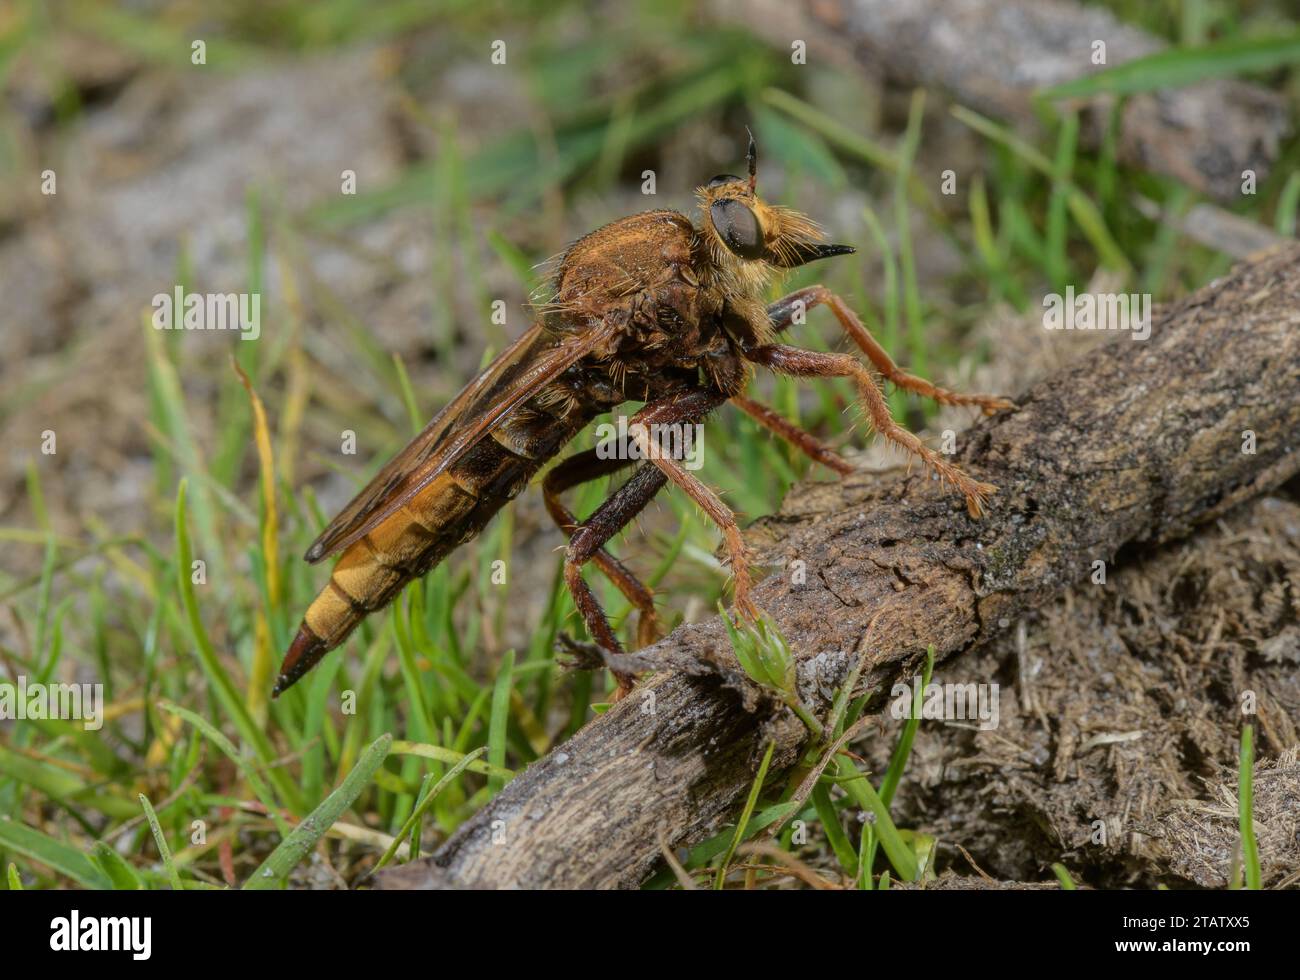 Hornet robberfly, Asilus crabroniformis, perched on twig by dung, heathy field, Dorset. Stock Photo